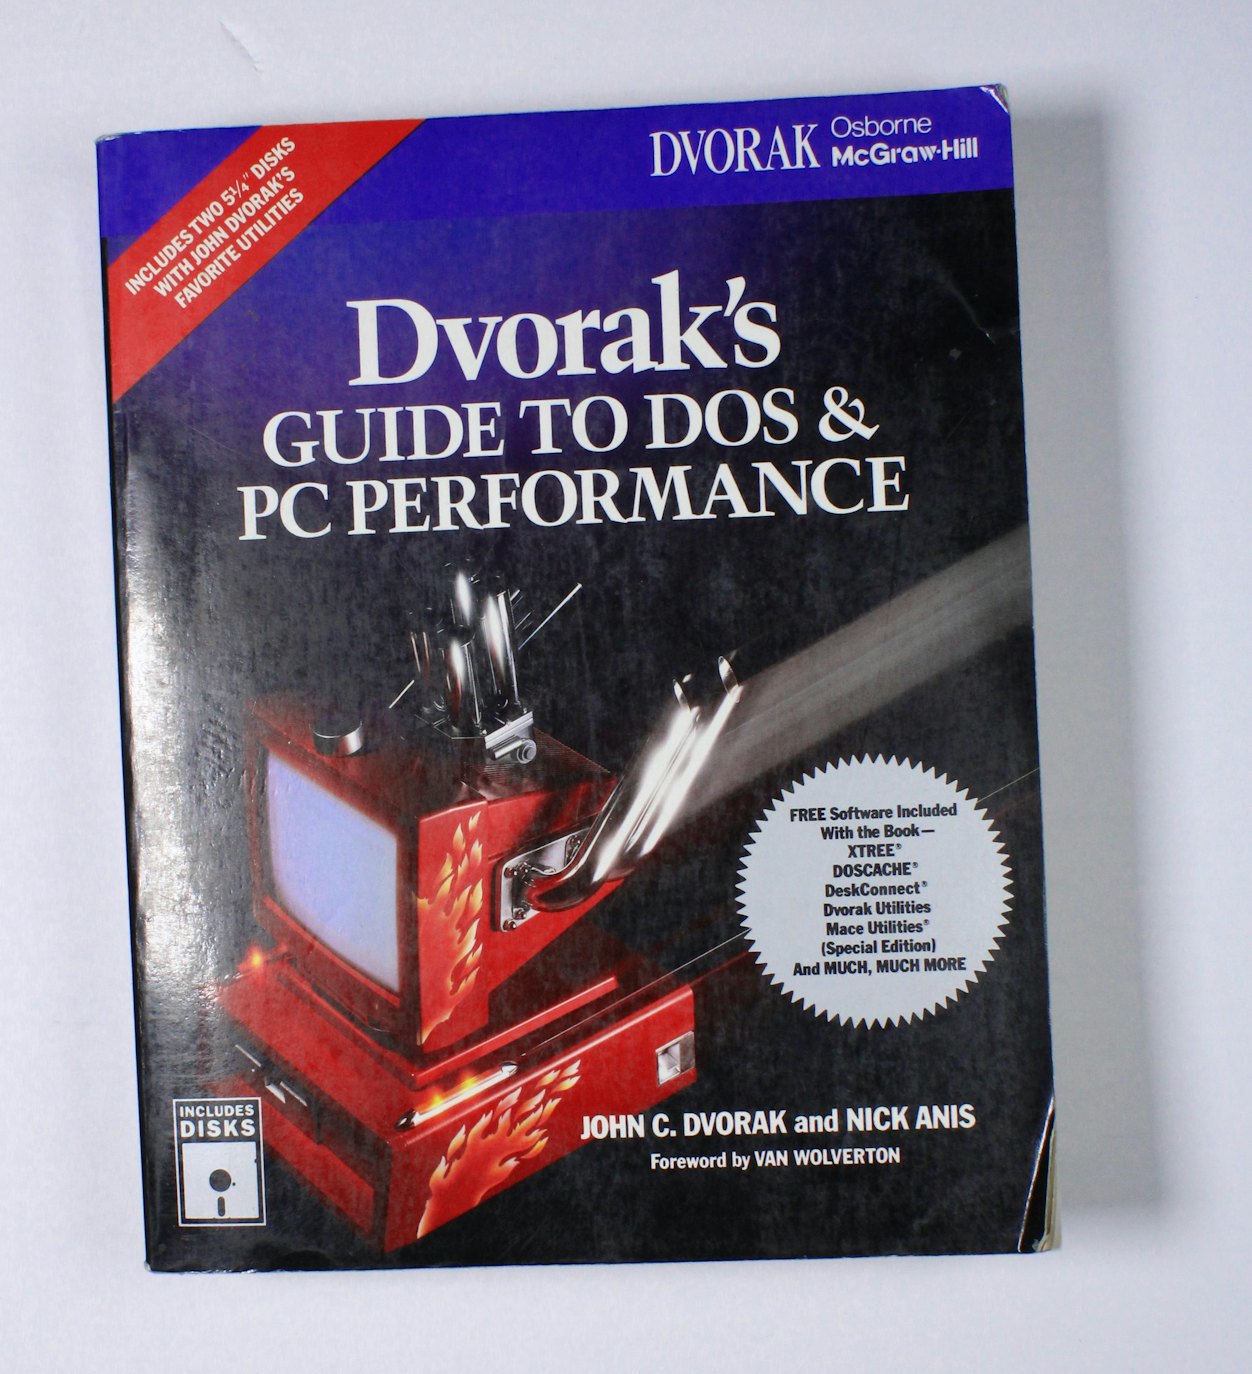 Dvorak’s Guide to DOS and PC Performance